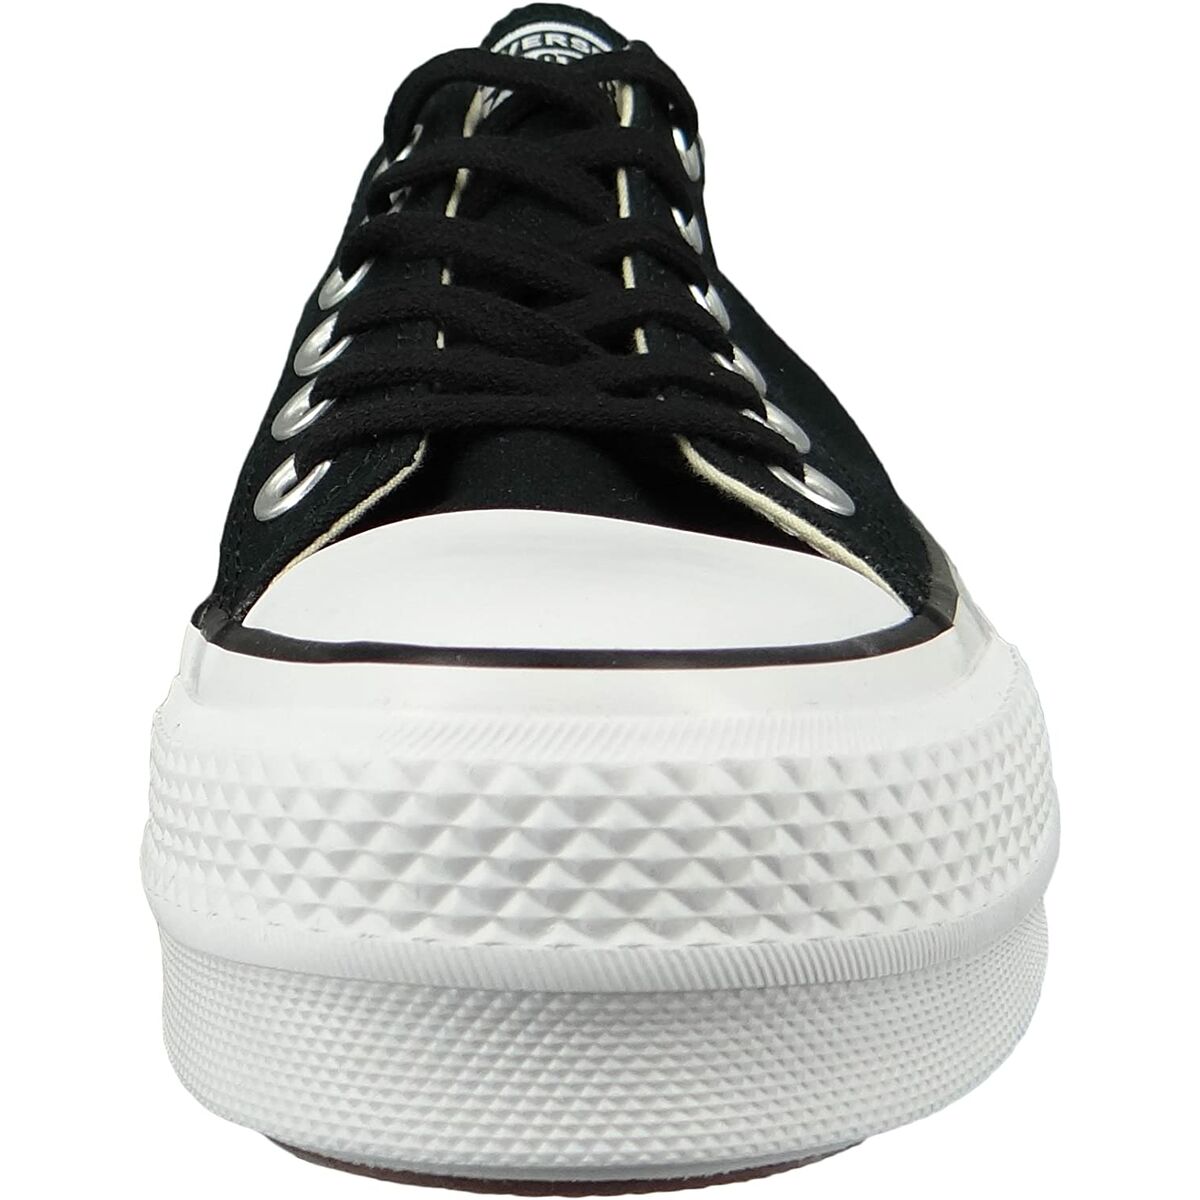 Women's casual trainers Chuck Taylor All Star Platform Converse 560250C Black (38)